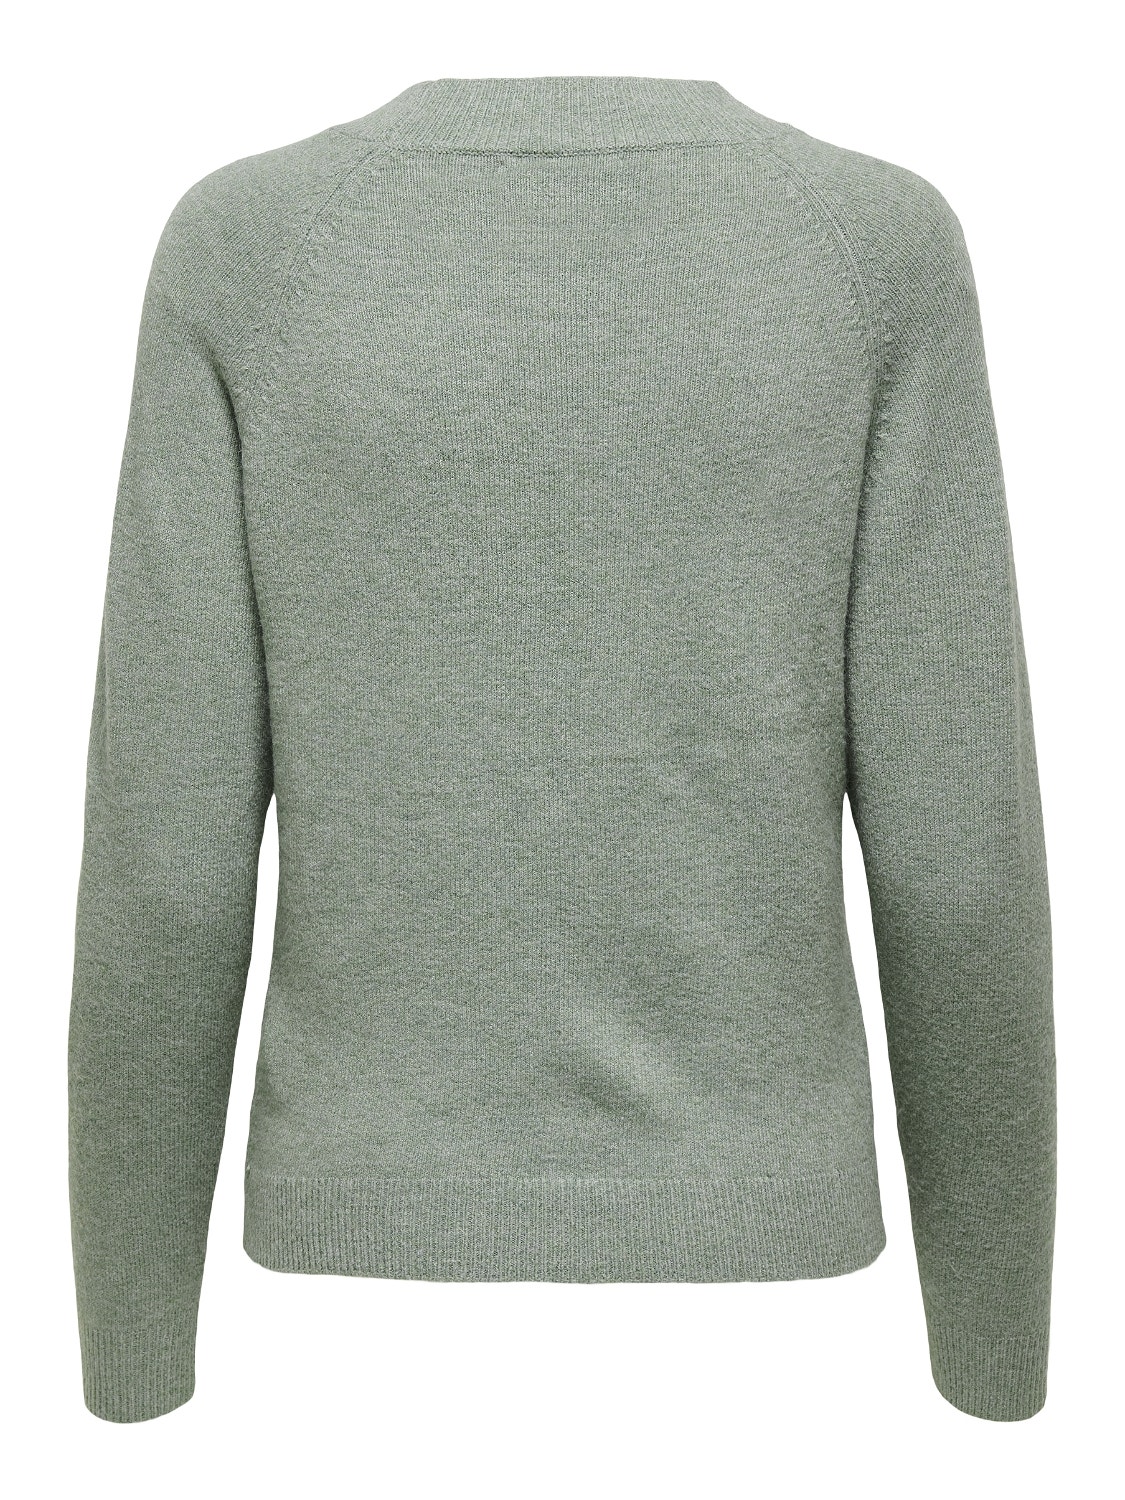 ONLY o-neck knitted pullover -Chinois Green - 15204279